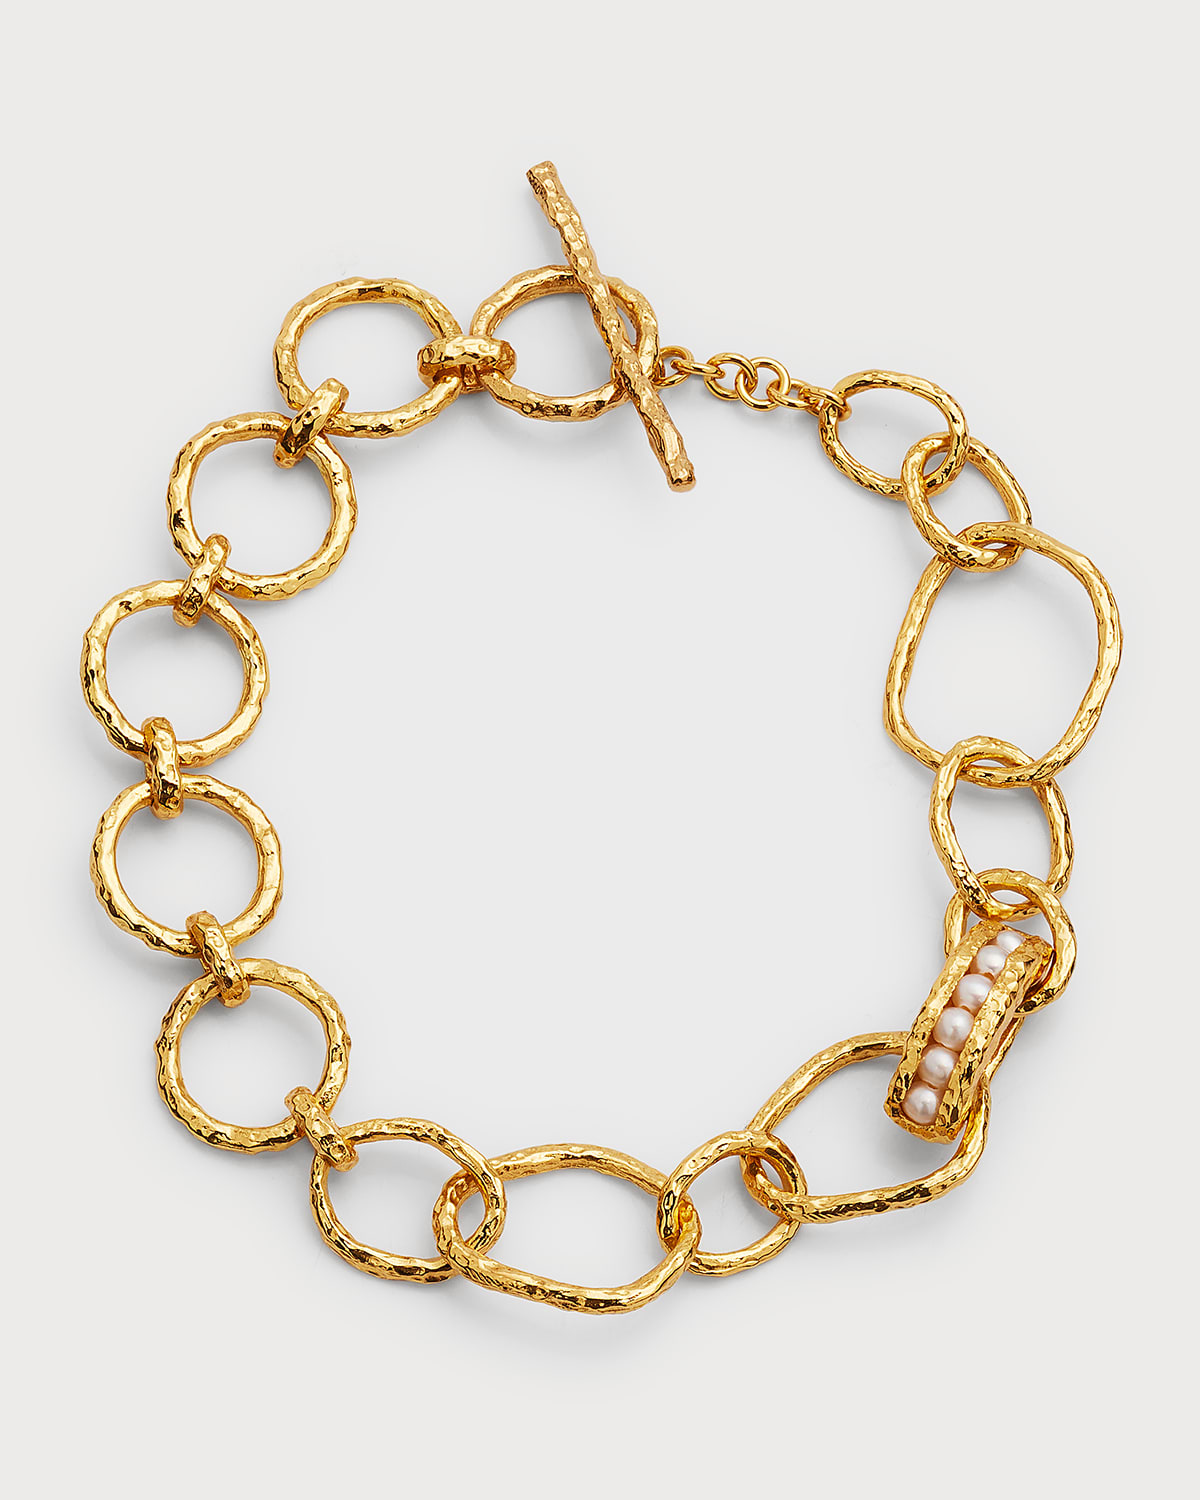 Pacharee Chain Bracelet with Pearls